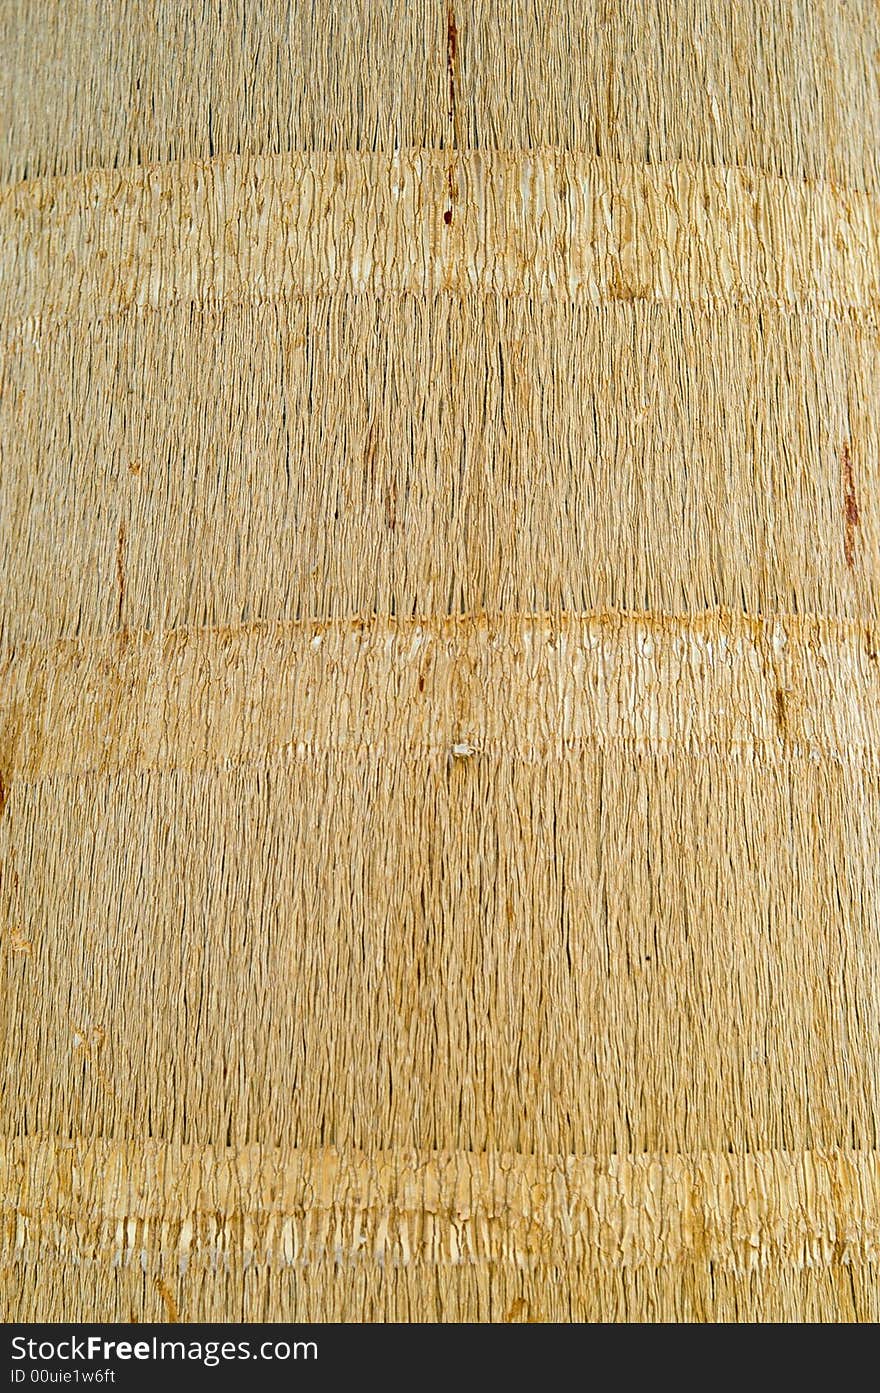 Royal palm wooden texture